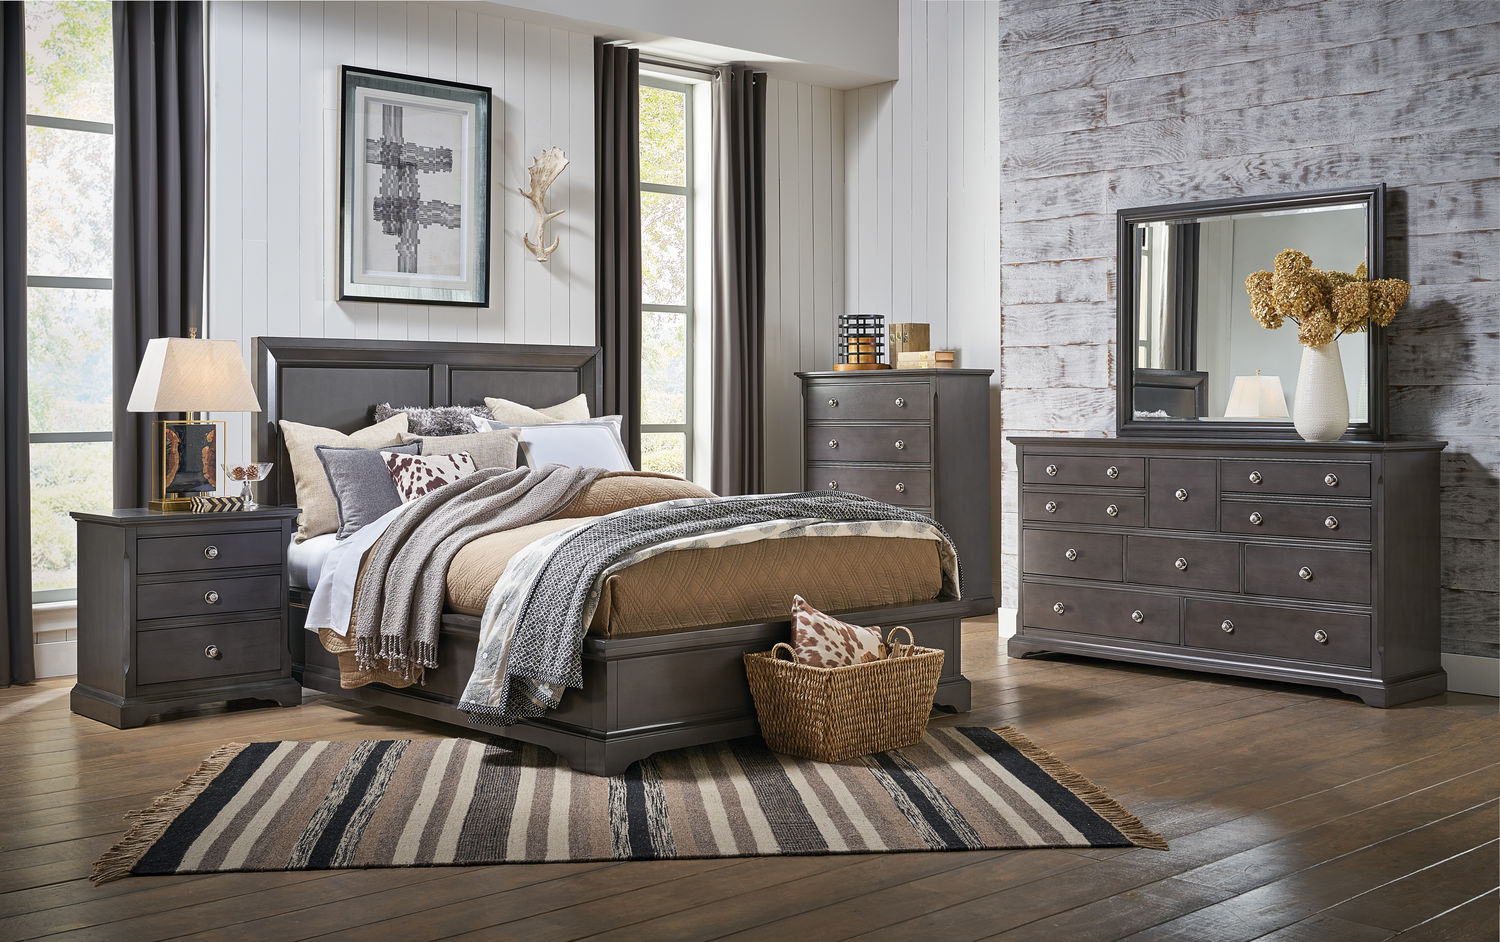 French Quarters Bedroom Suite By Thomas Cole Hom Furniture